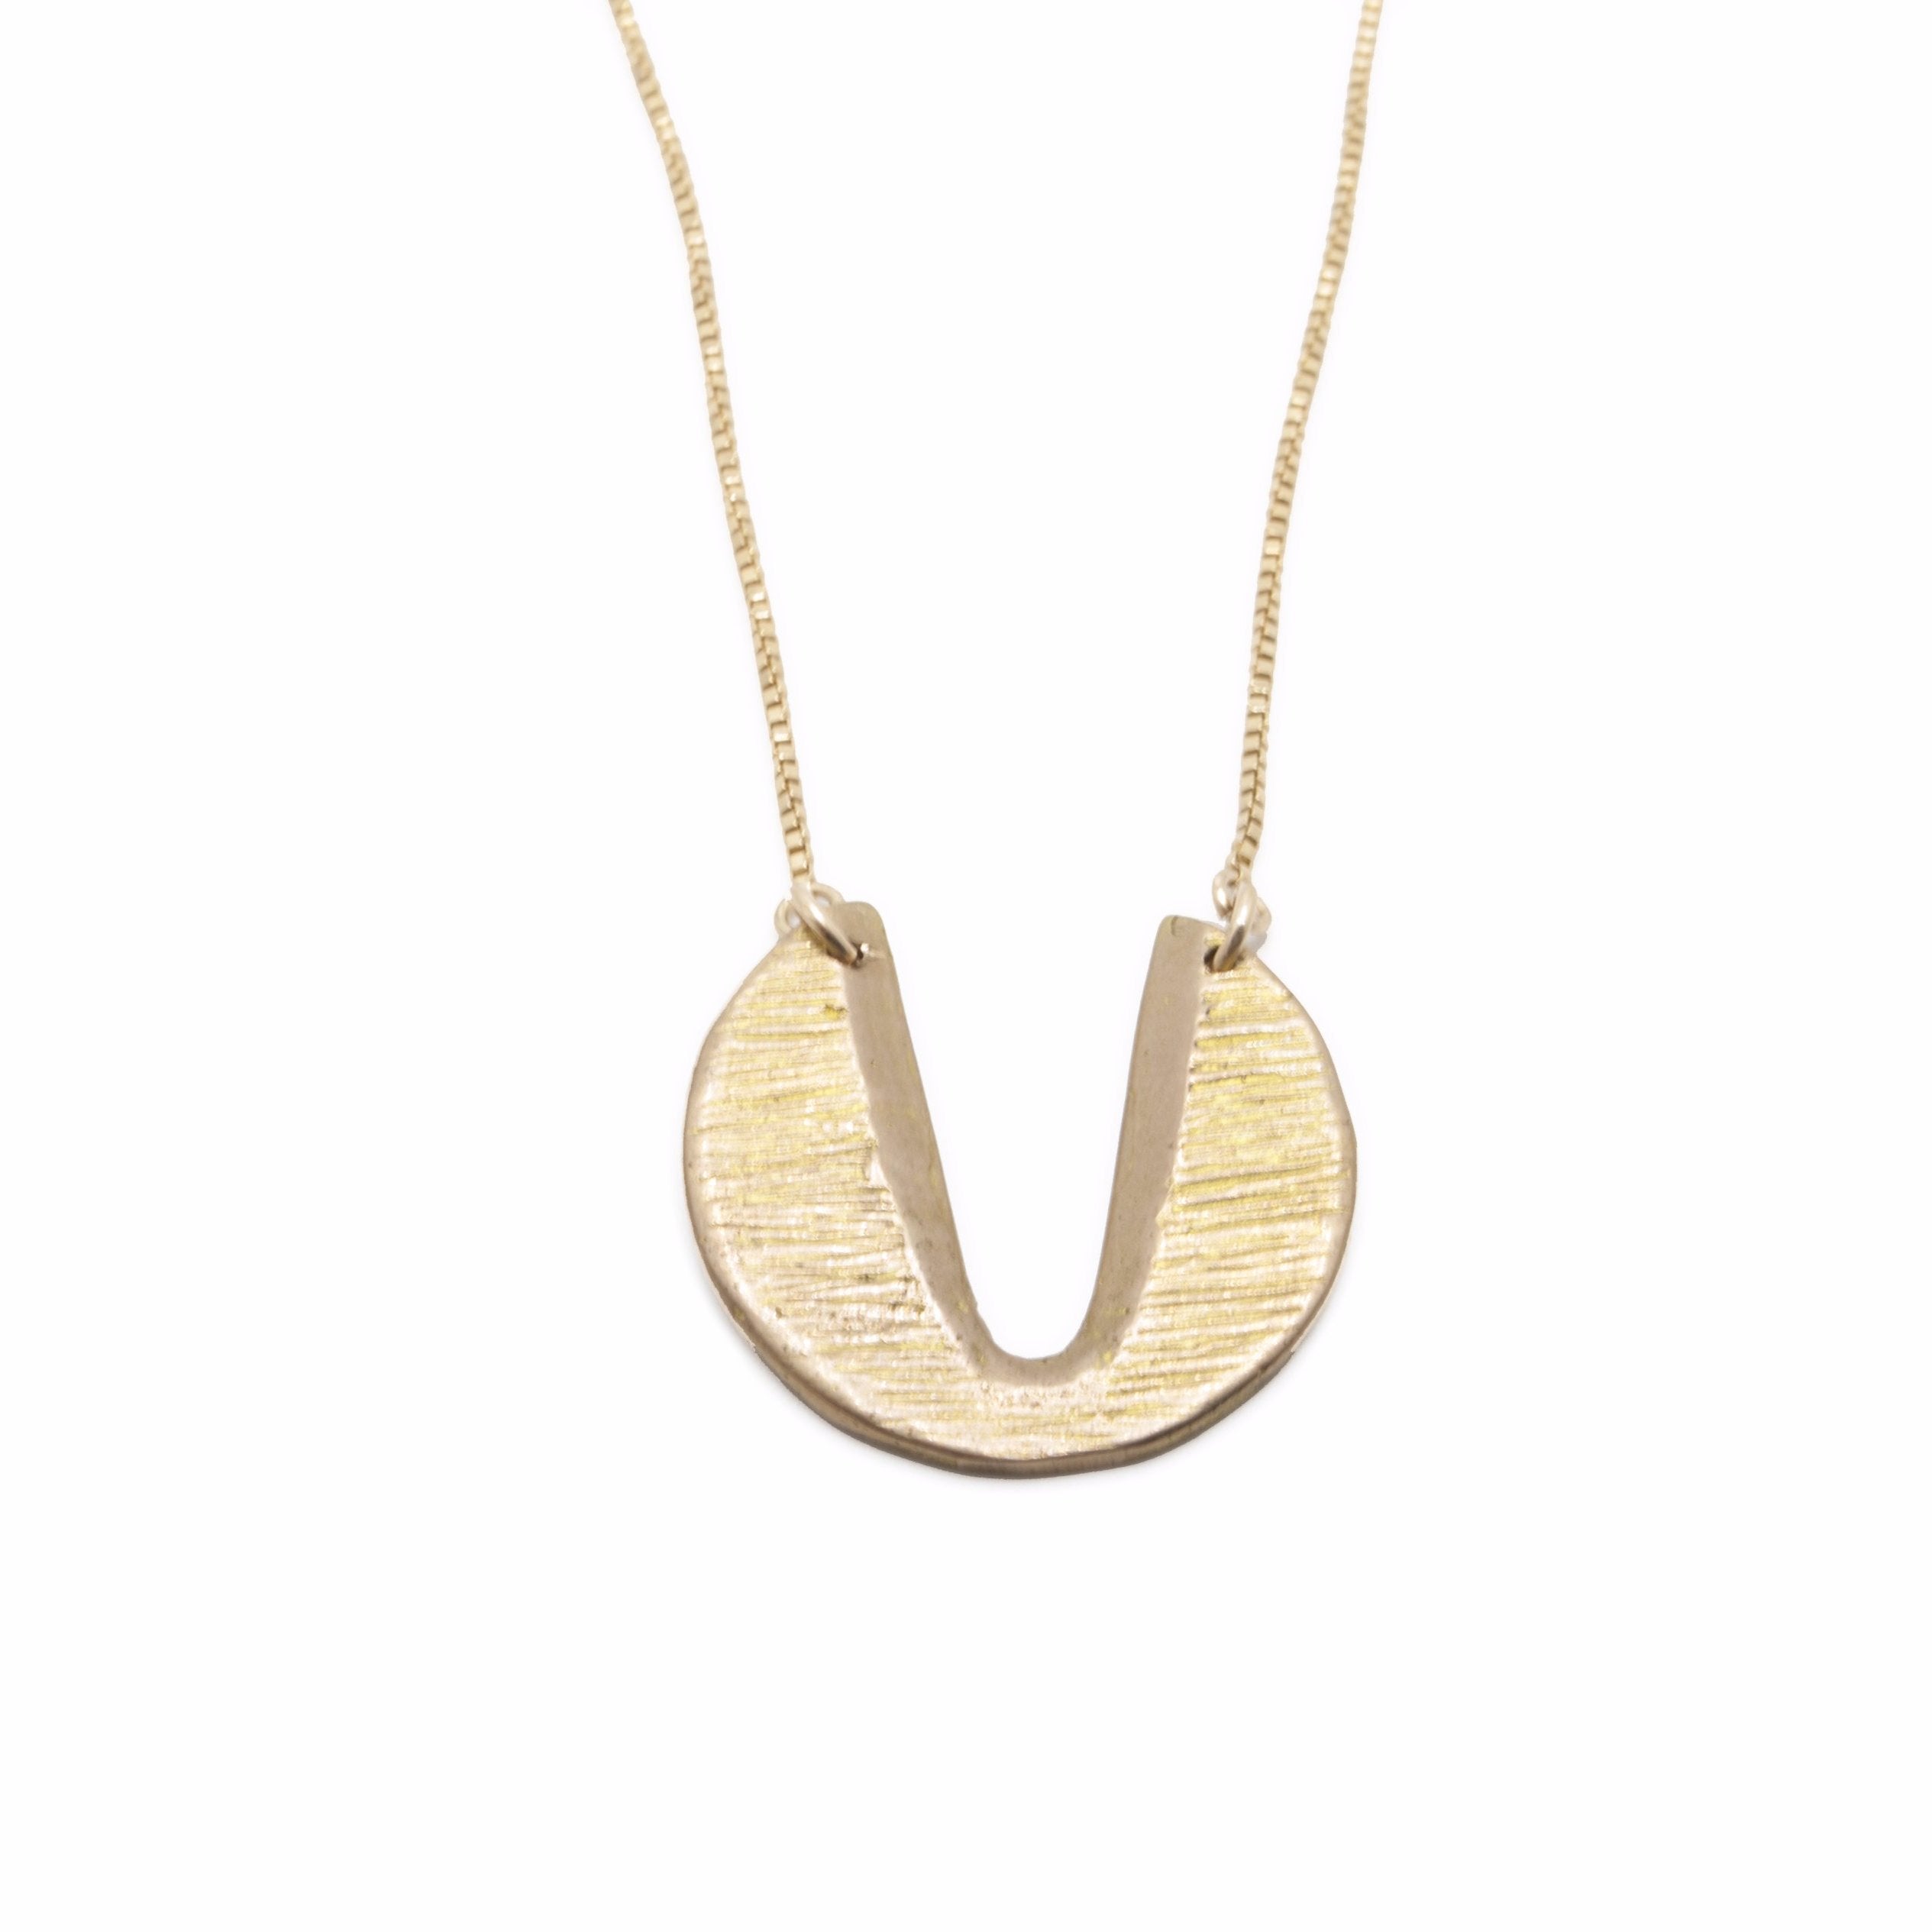 FORTUNATE NECKLACE - Gold Plate